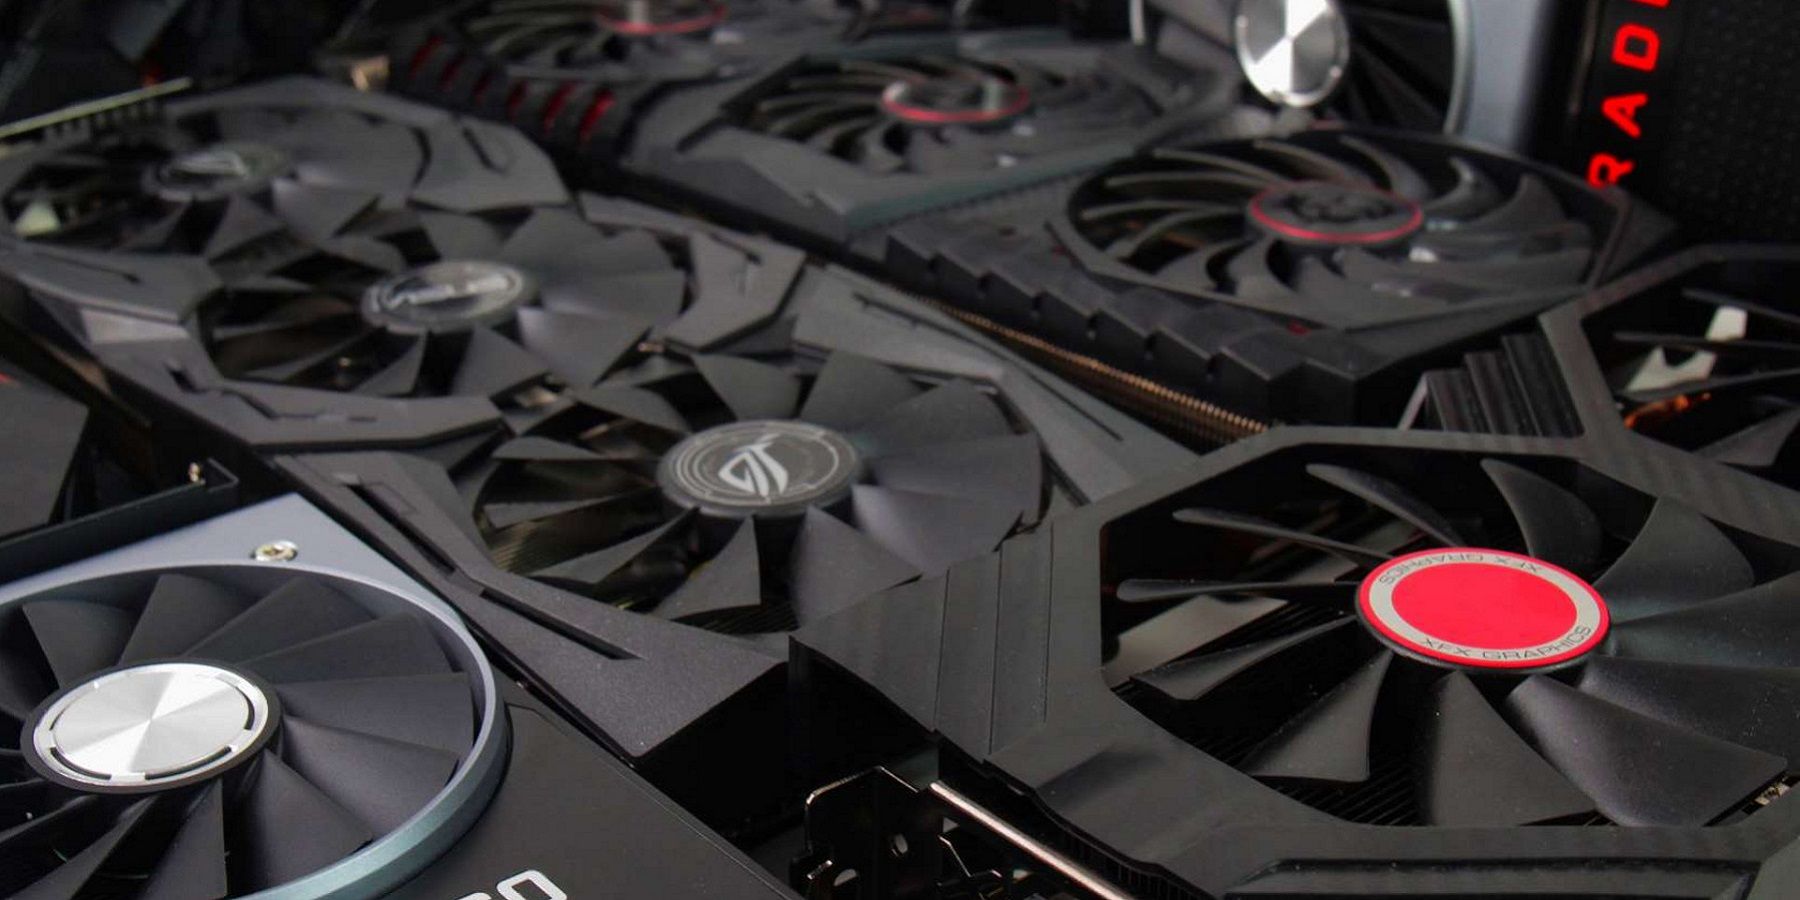 A photo showing a bunch of AMD and Nvidia graphics cards.